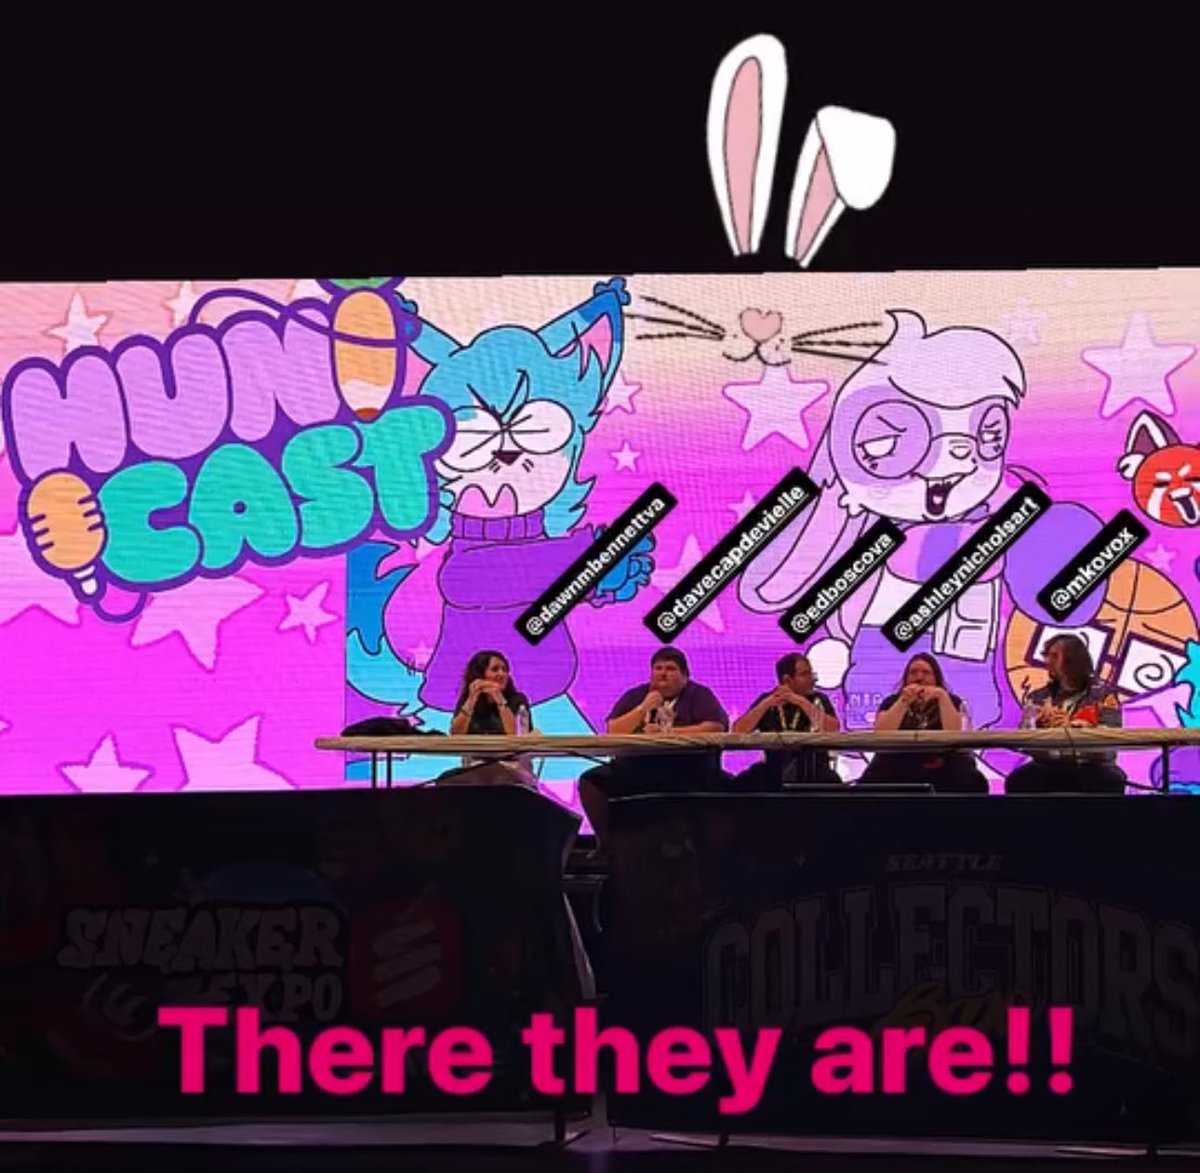 Thank you so much @AshNicholsArt @kovox @EdBoscoVA @DaveCapdevielle for letting me be a part of the first-ever LIVE HuniCast!!! It was deliciously chaotic. (I even got to say “Oh, Ashley… ❤️” too! 😜)